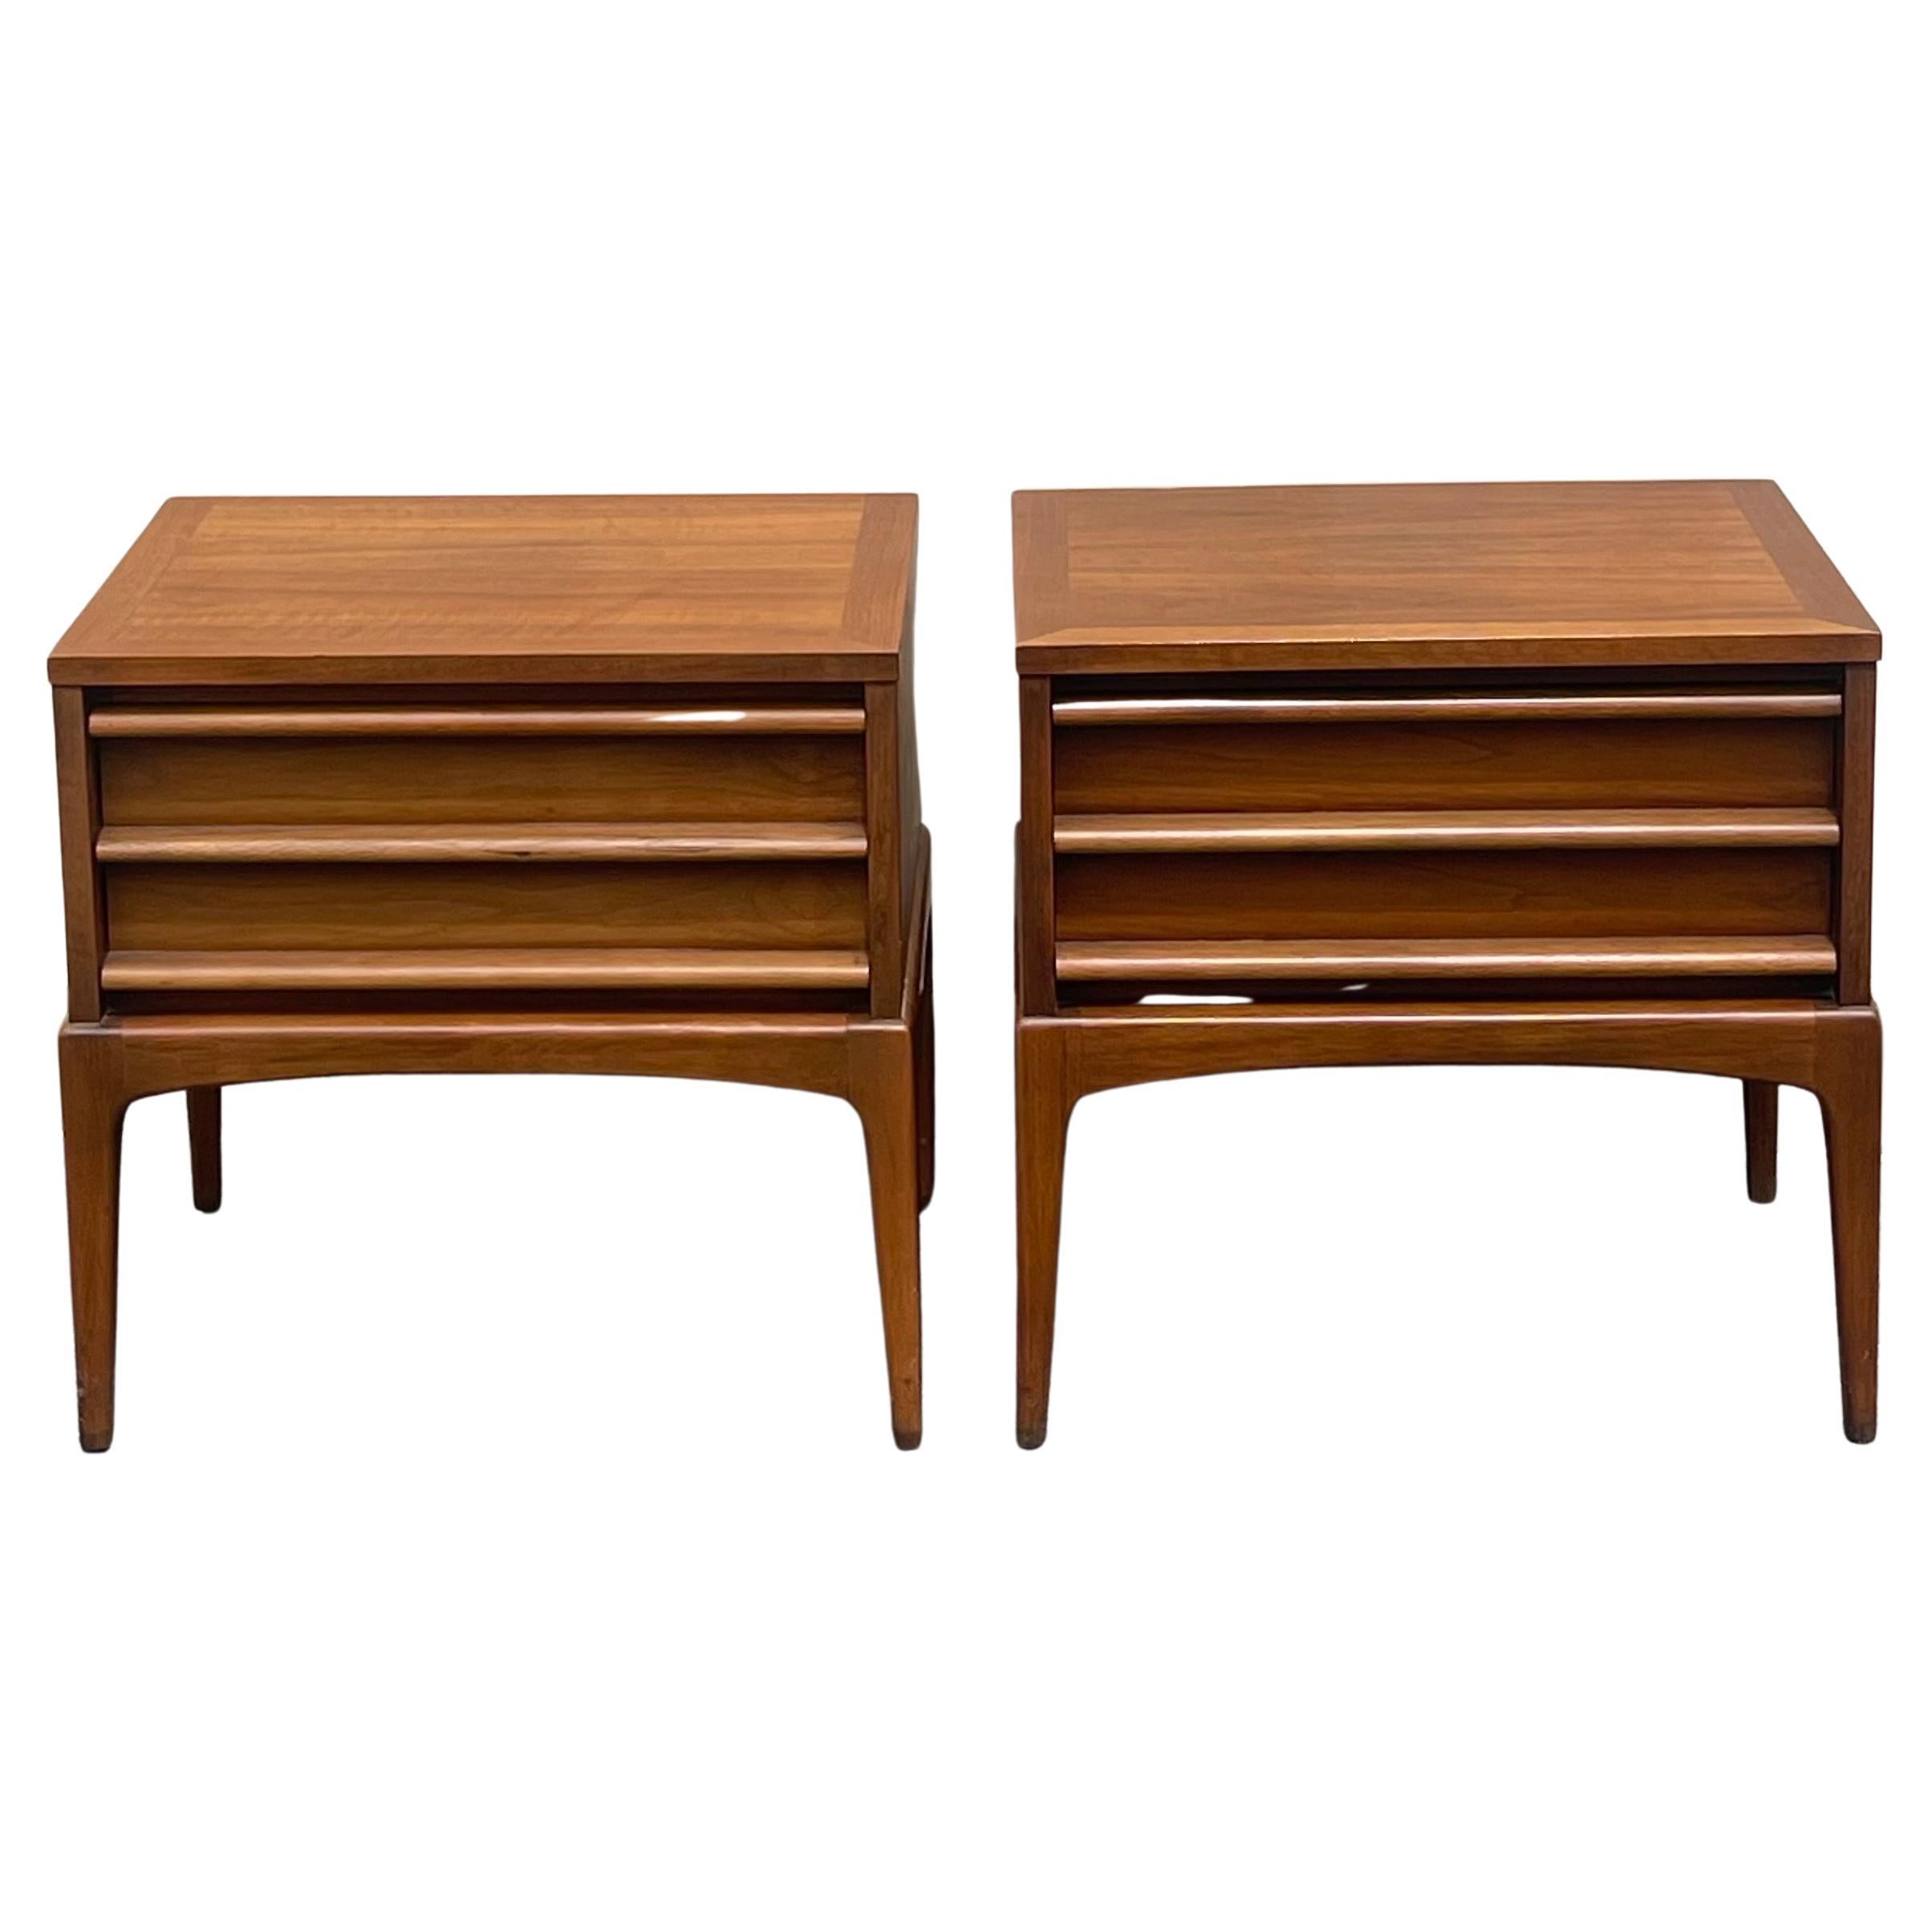 A very nice pair of American MCM walnut night stands from the 